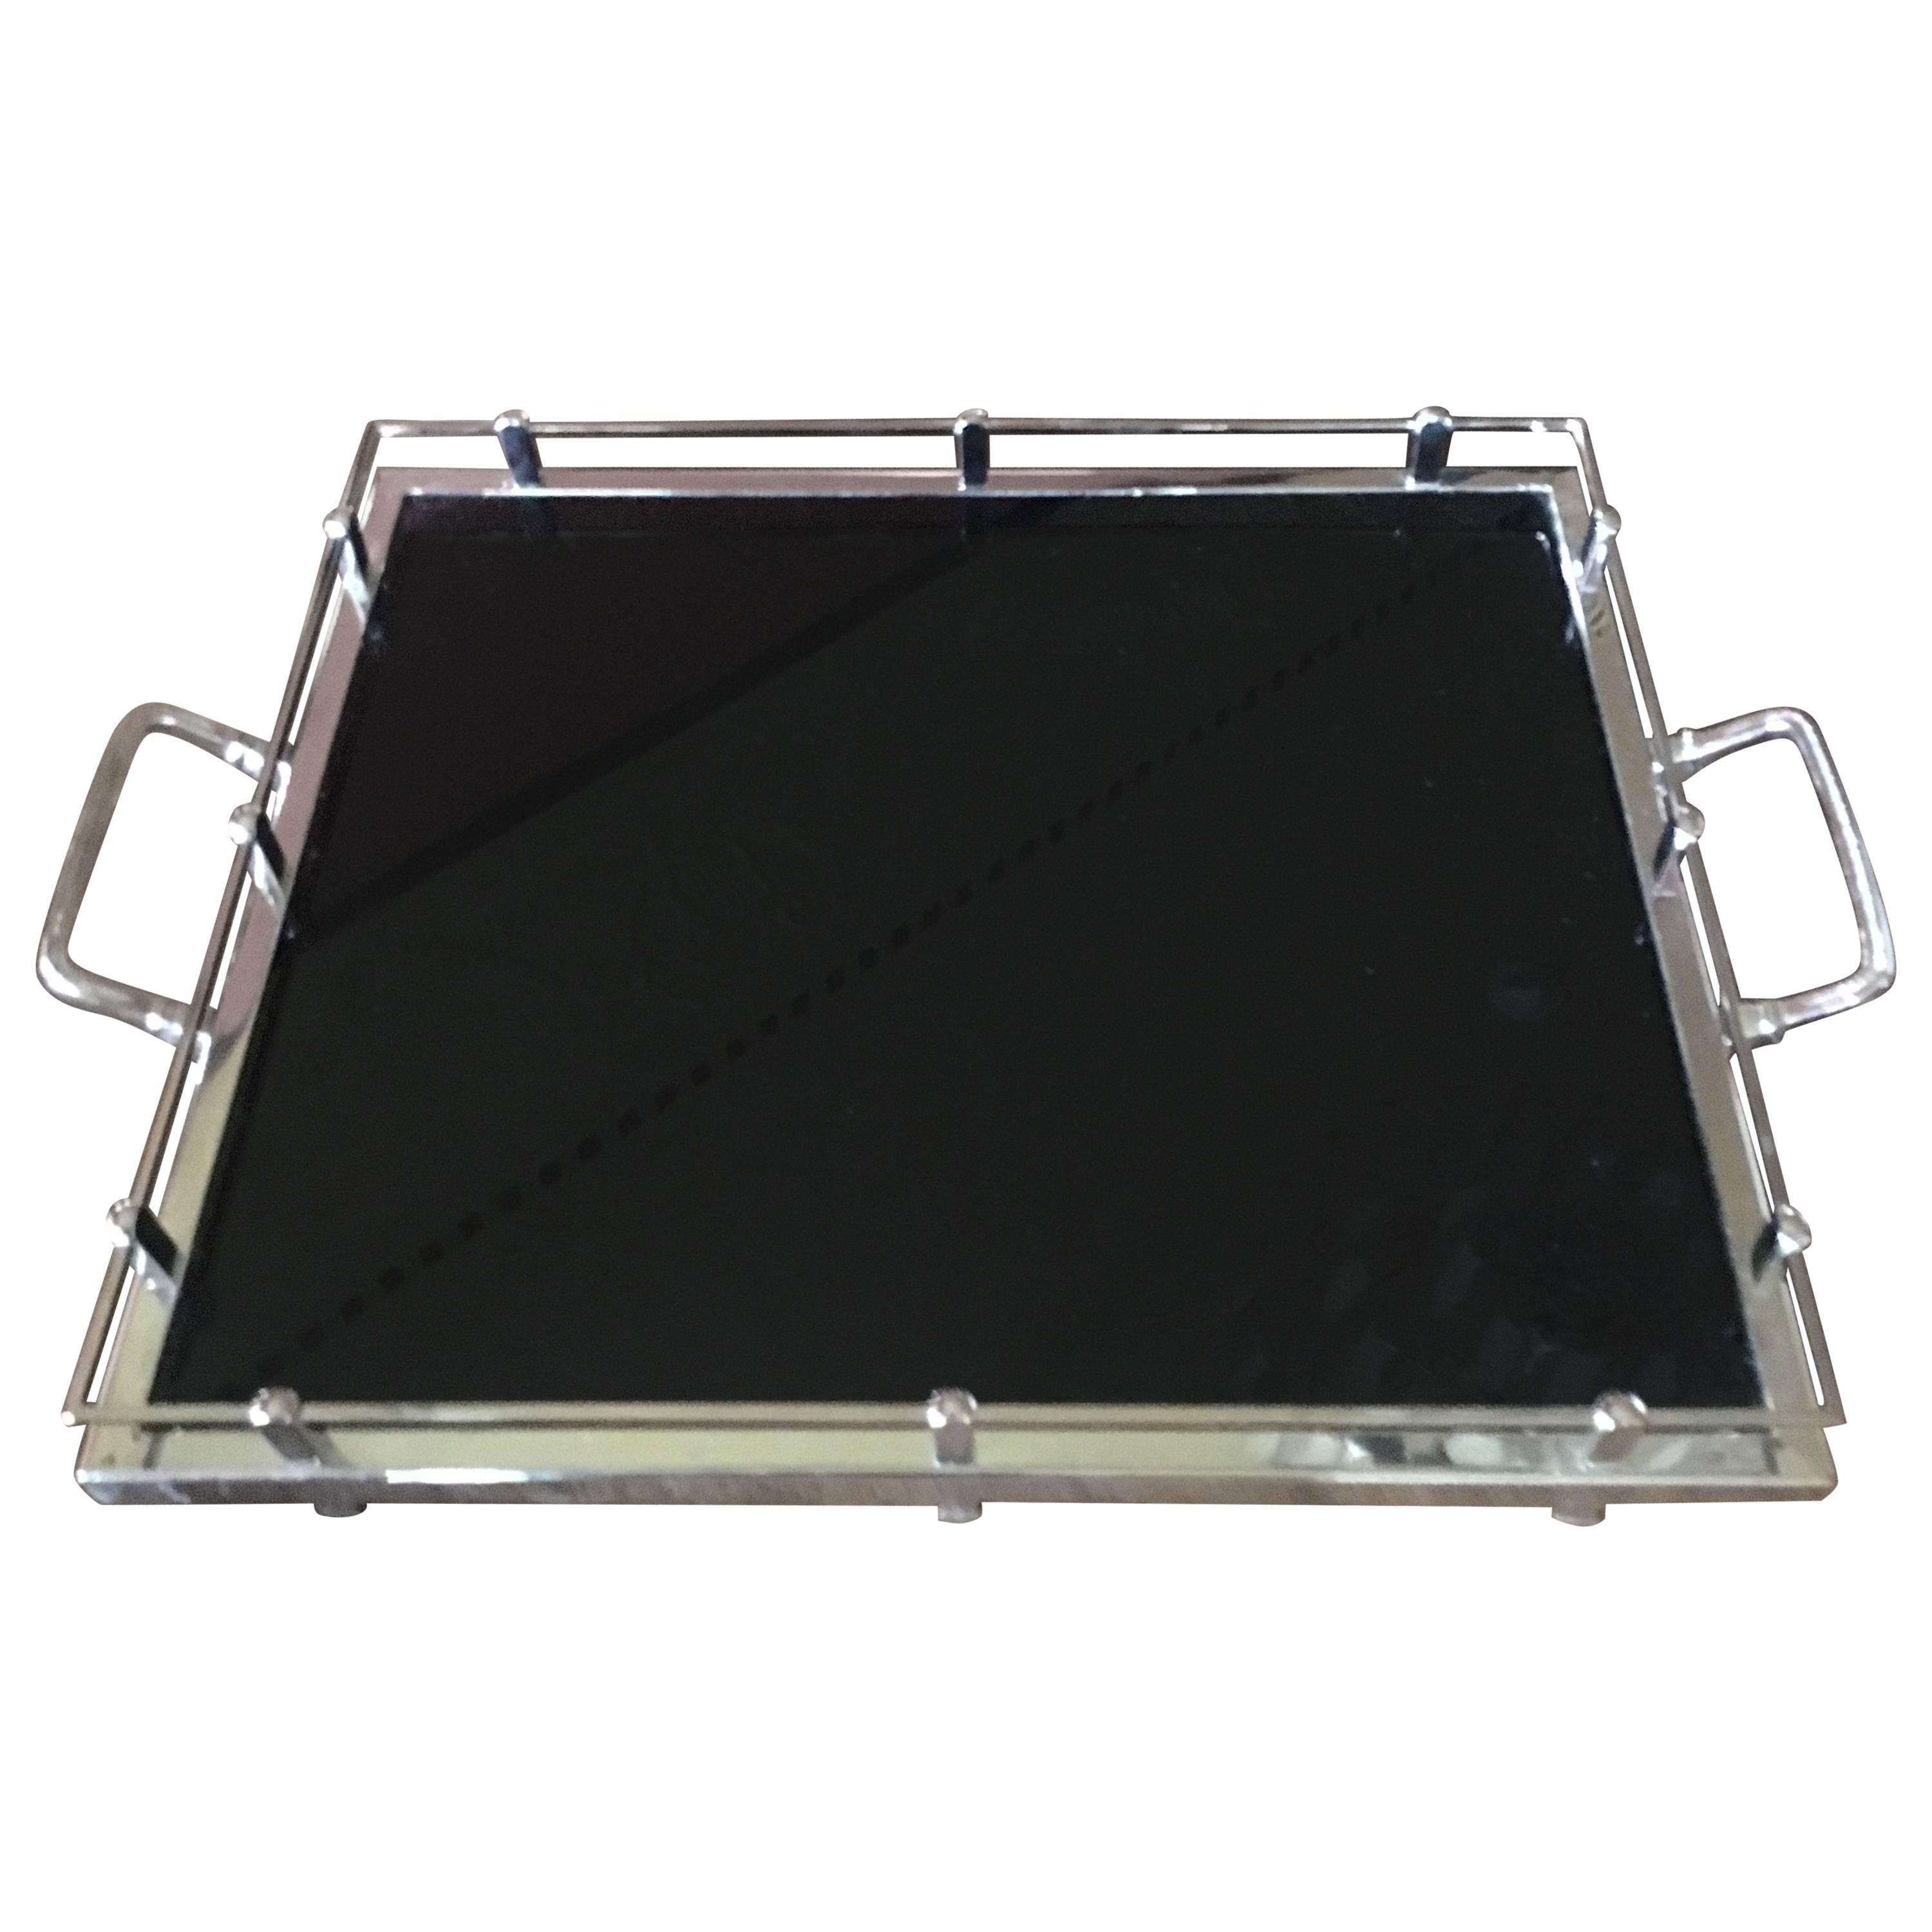 Modern Black Glass and Silver Plate Tray with Gallery